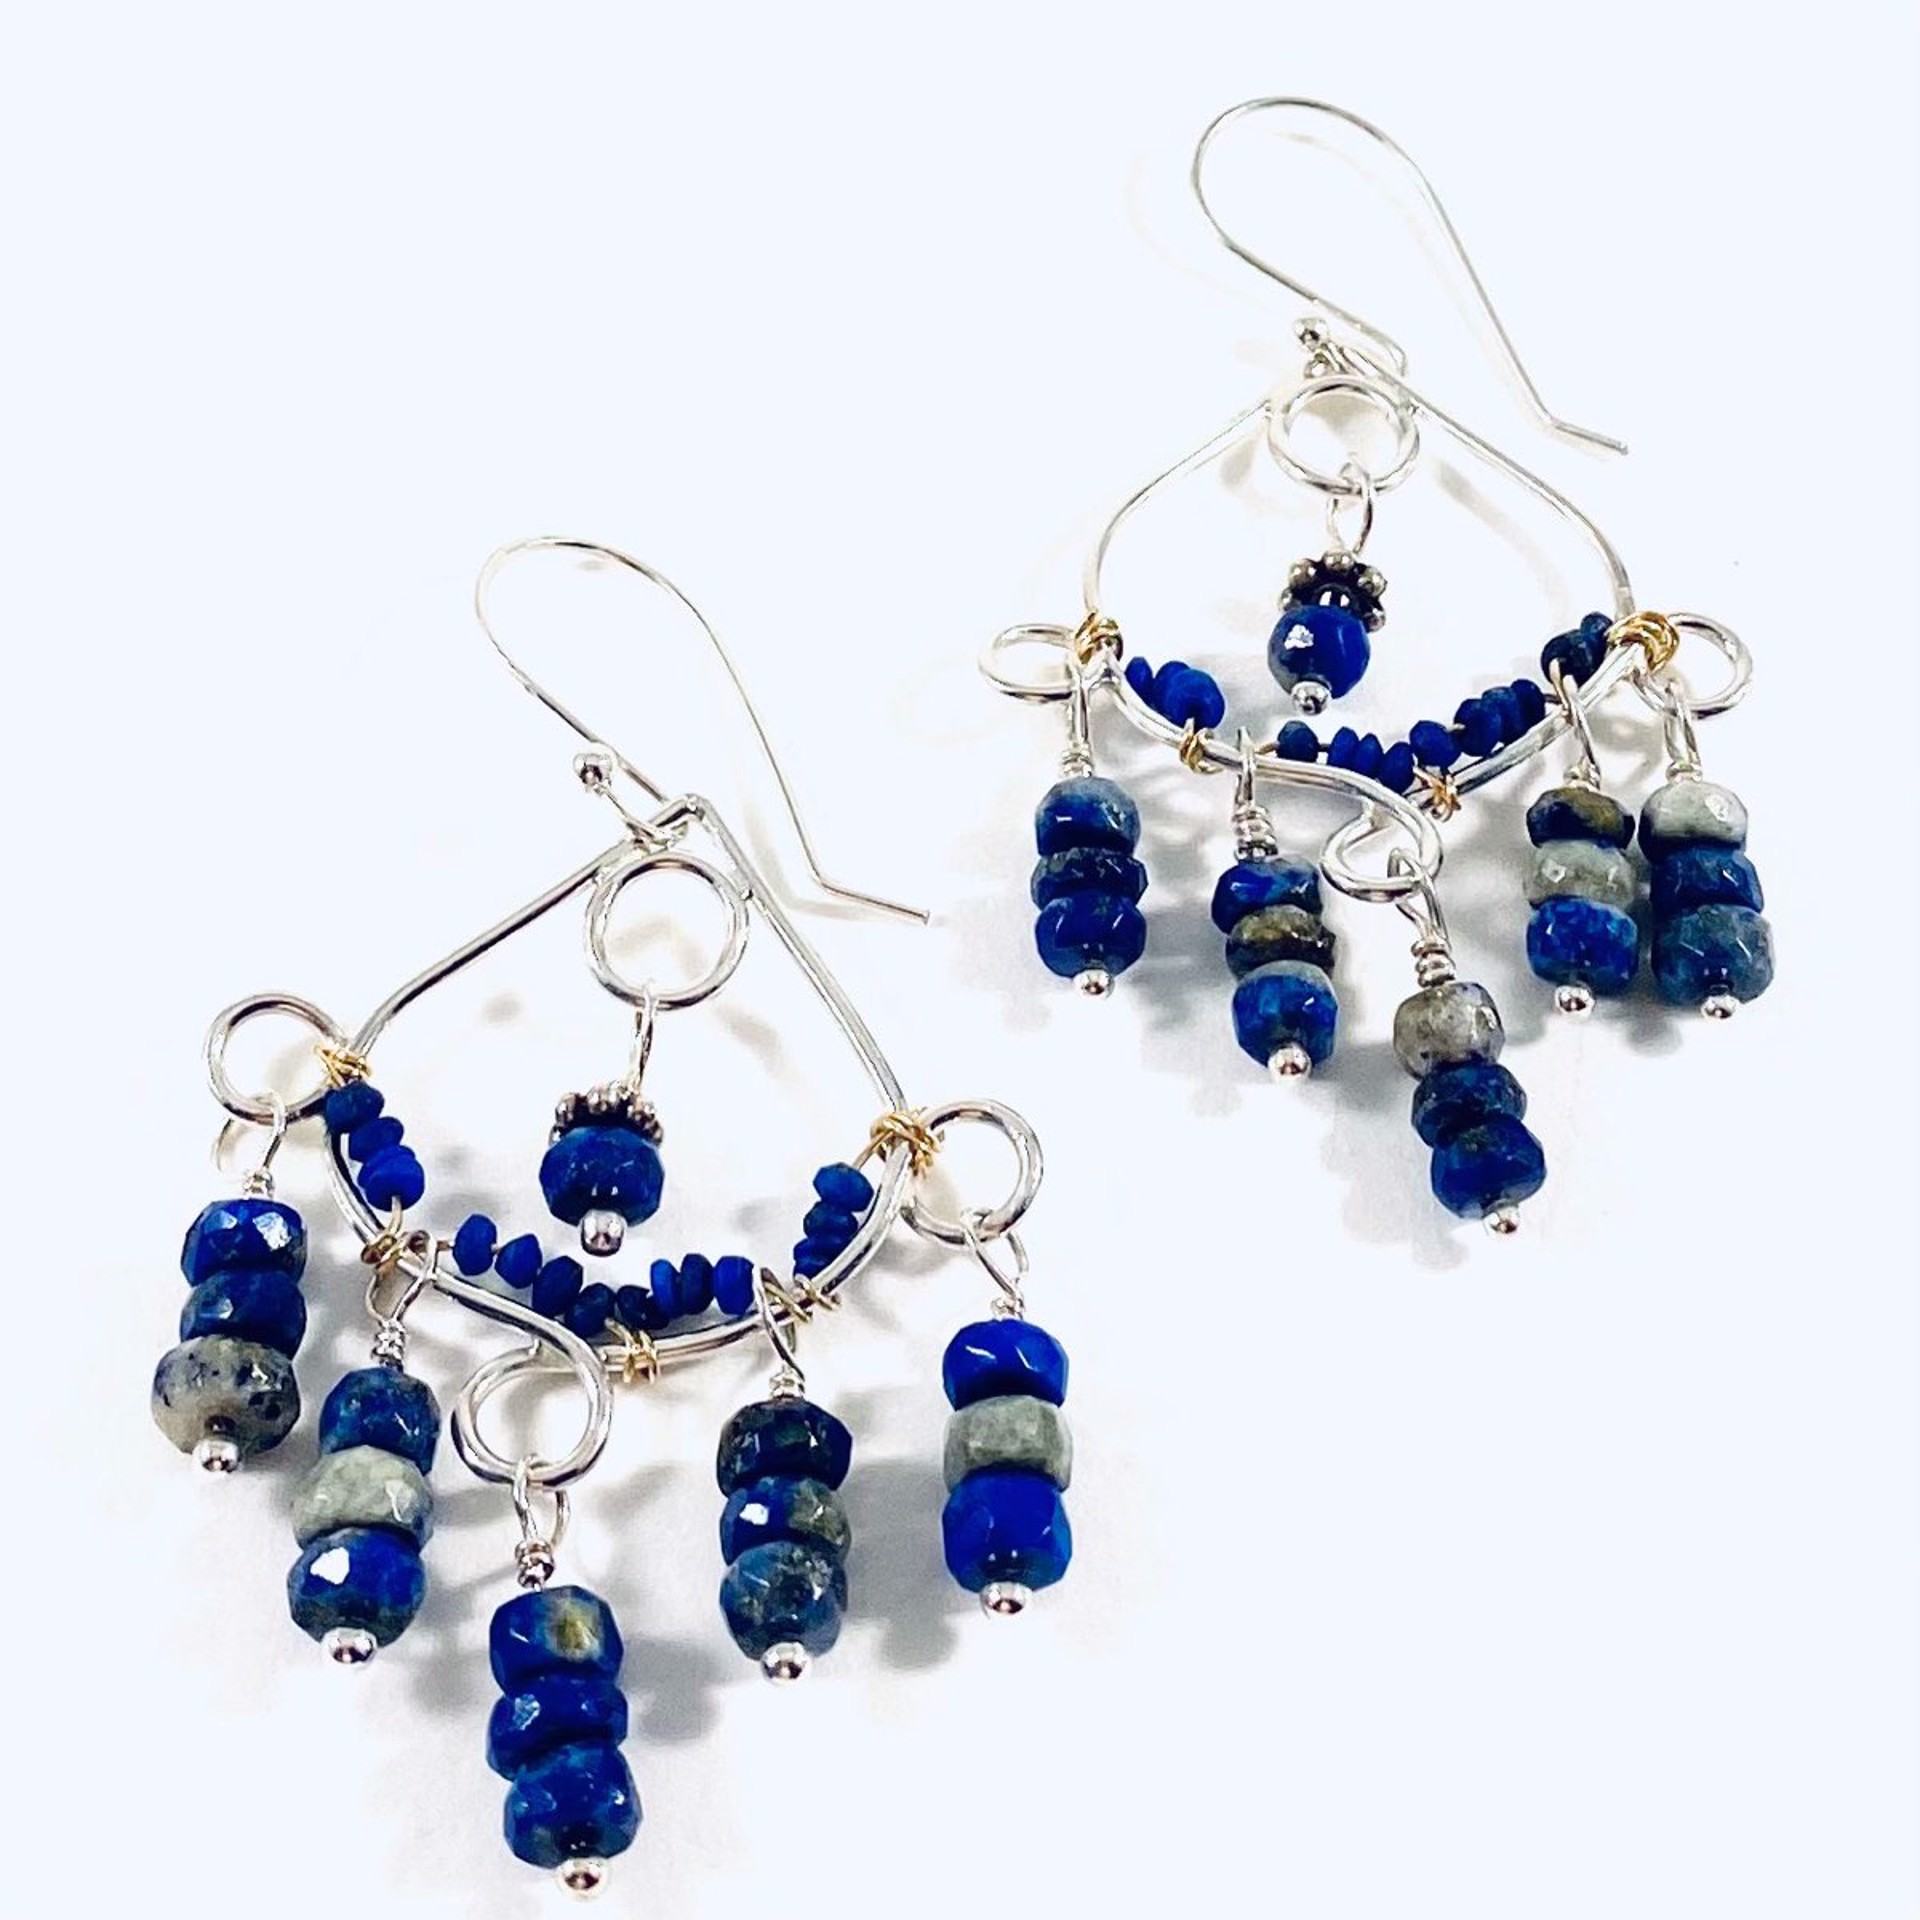 AB21-81 Lapis, Silver Earrings by Anne Bivens